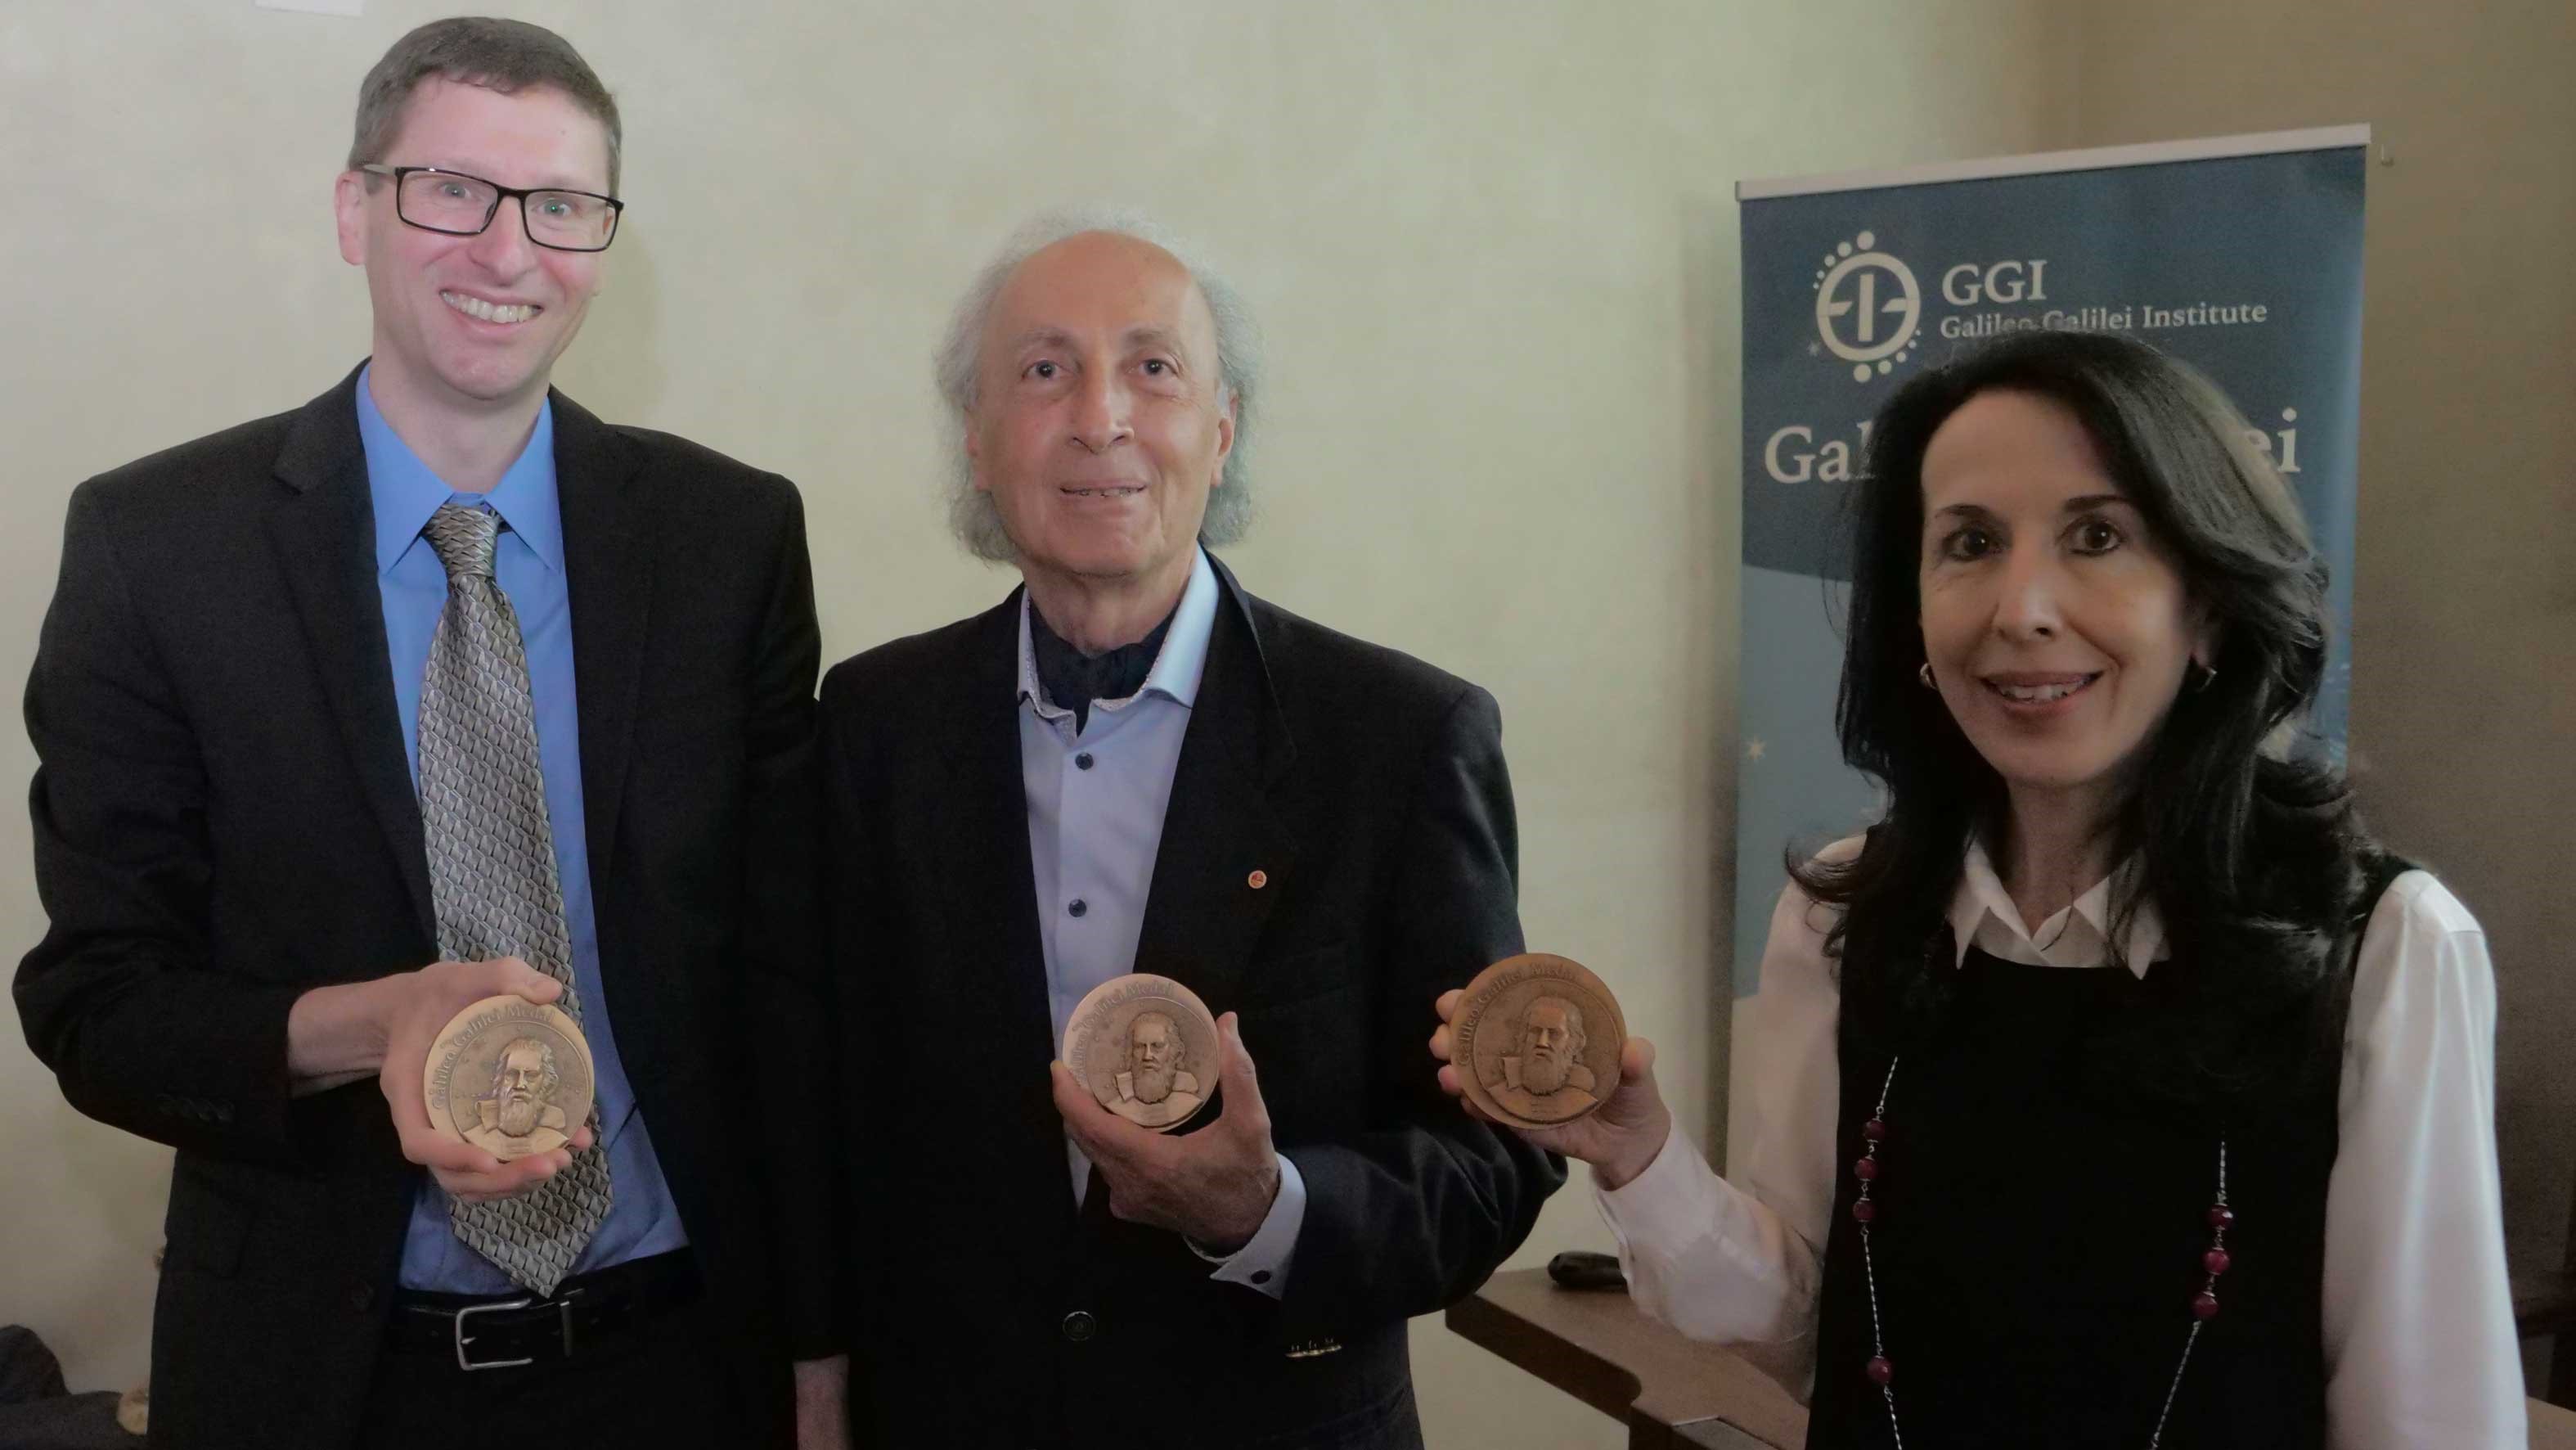 The Galileo Galilei Medal 2021 winners. From left to right: Frans Pretorius, Thibault Damour, and Alessandra Buonanno. Photo: INFN